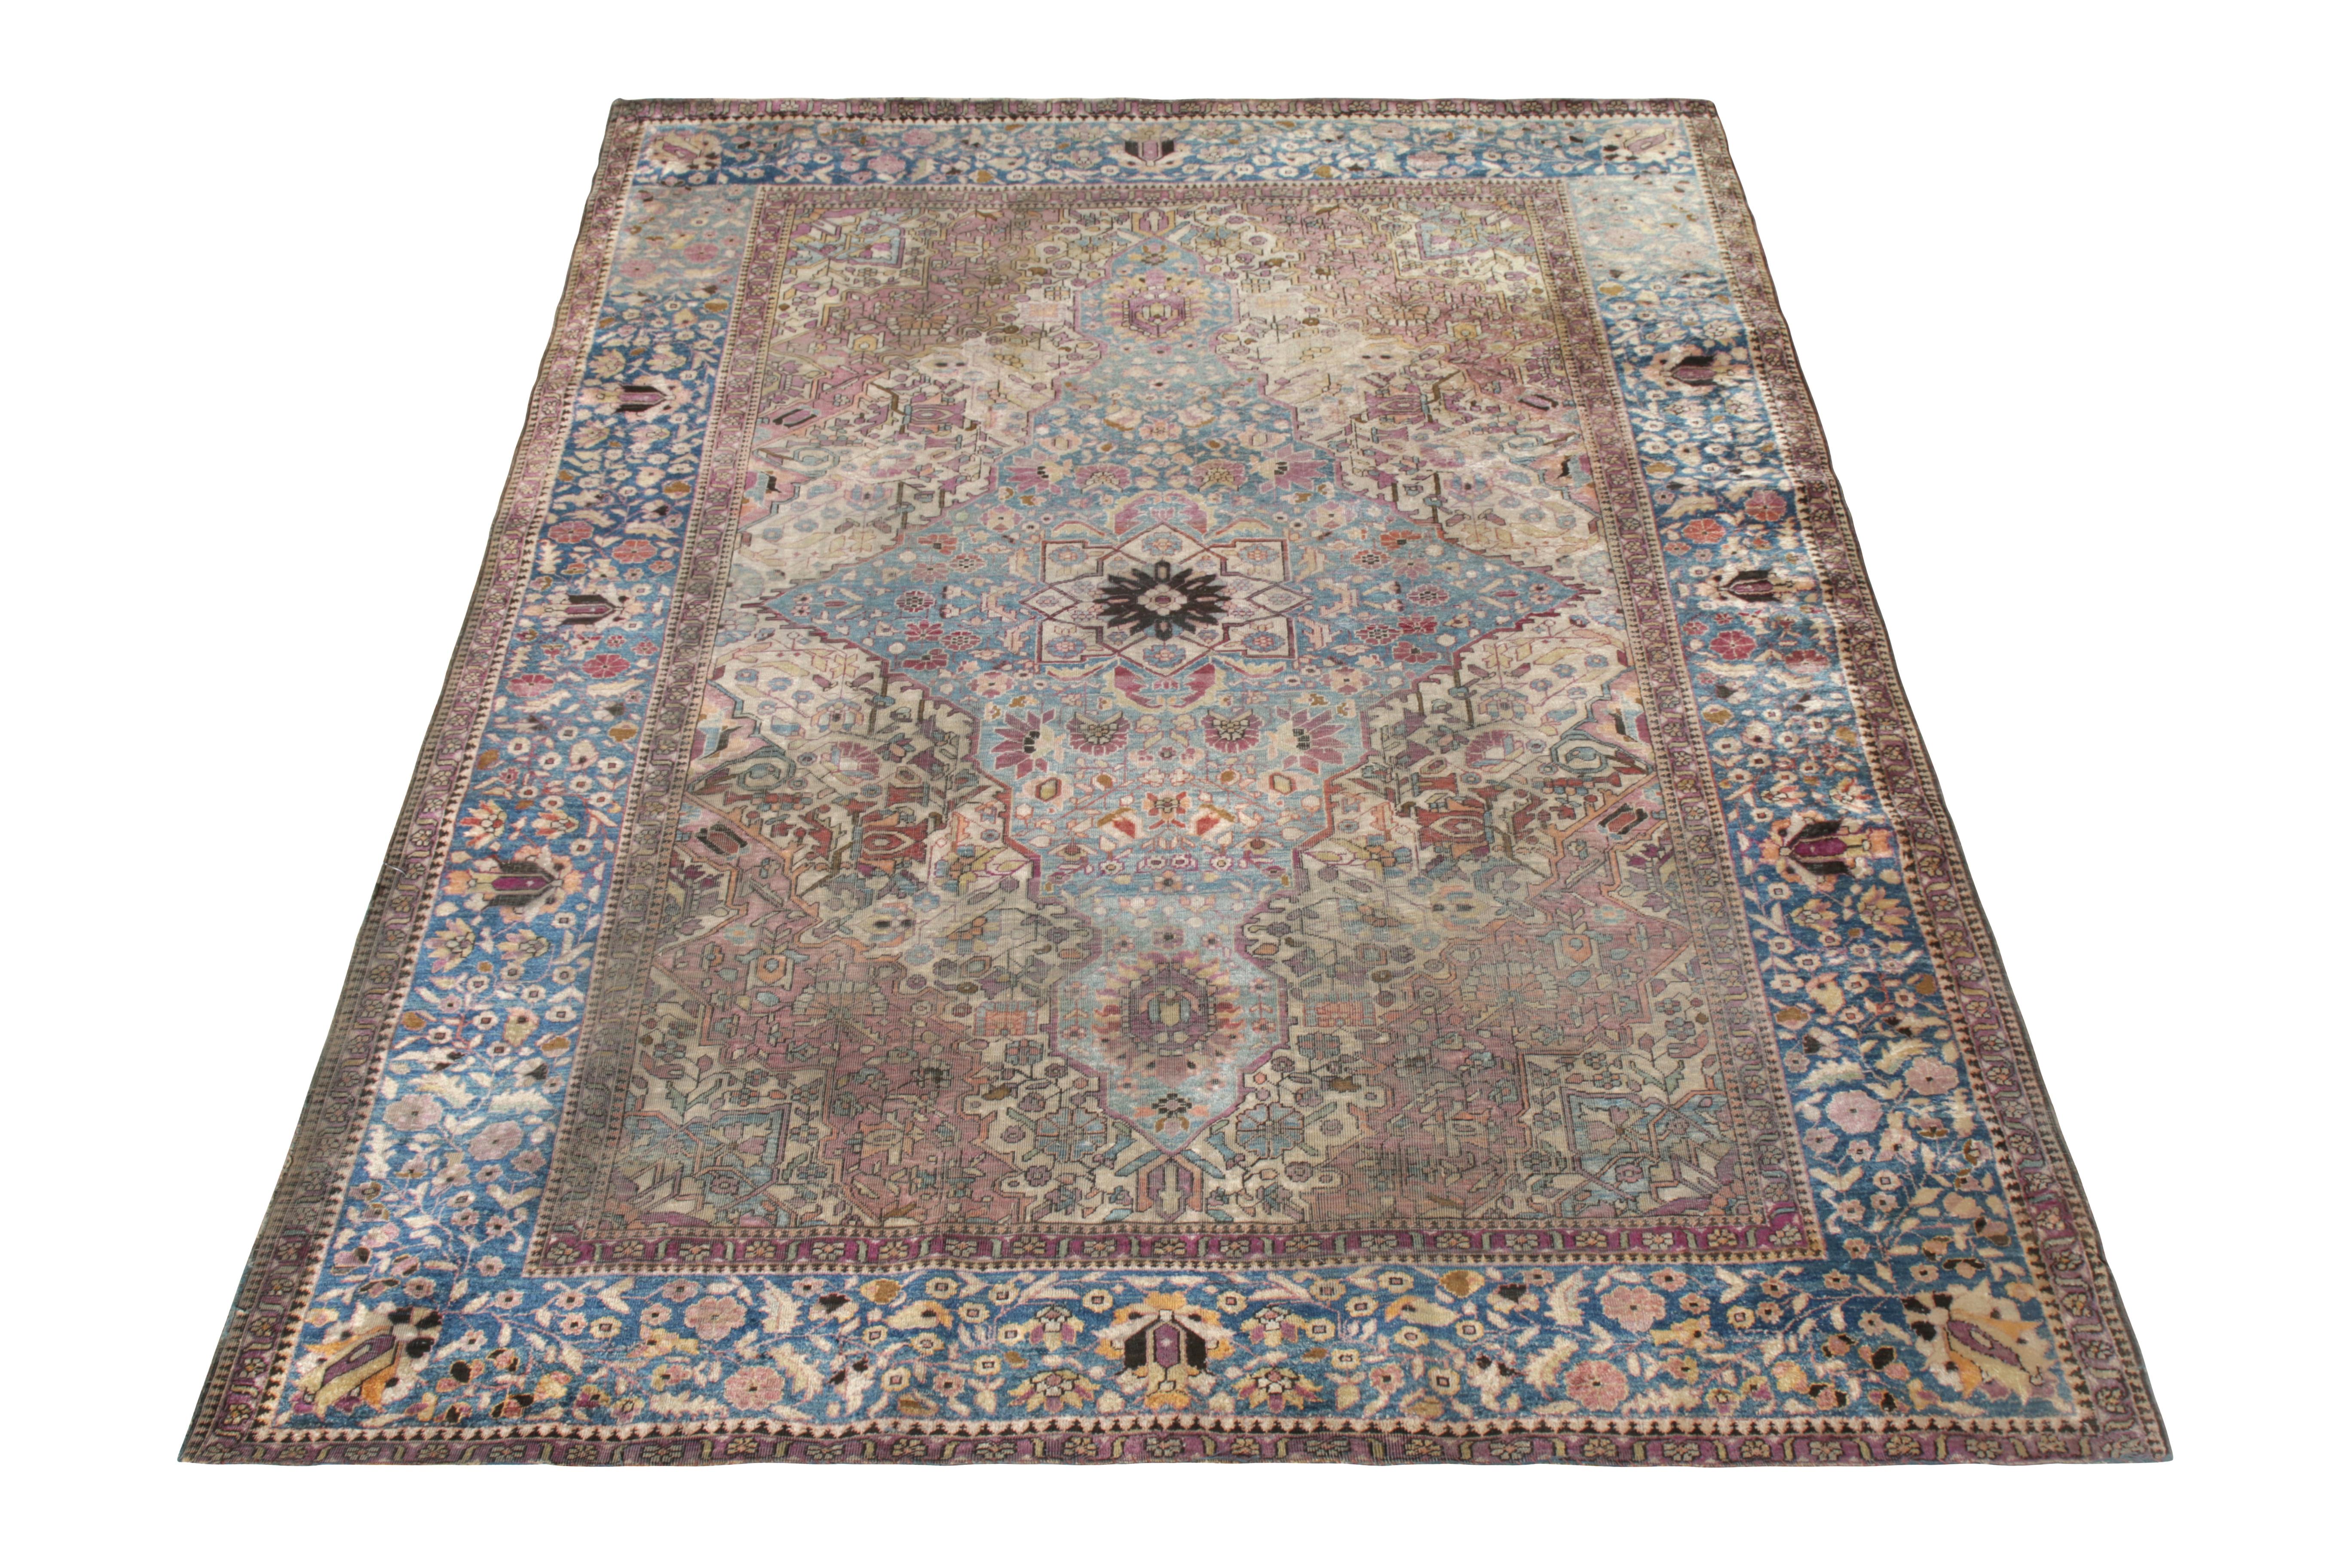 A 4x6 antique Persian rug of Farahan design in blue and pink, hand knotted in silk, circa 1890-1900. Some distress in the field, ultimately lending a classic charm complementing a unique sensibility even among this celebrated lineage.

Further on